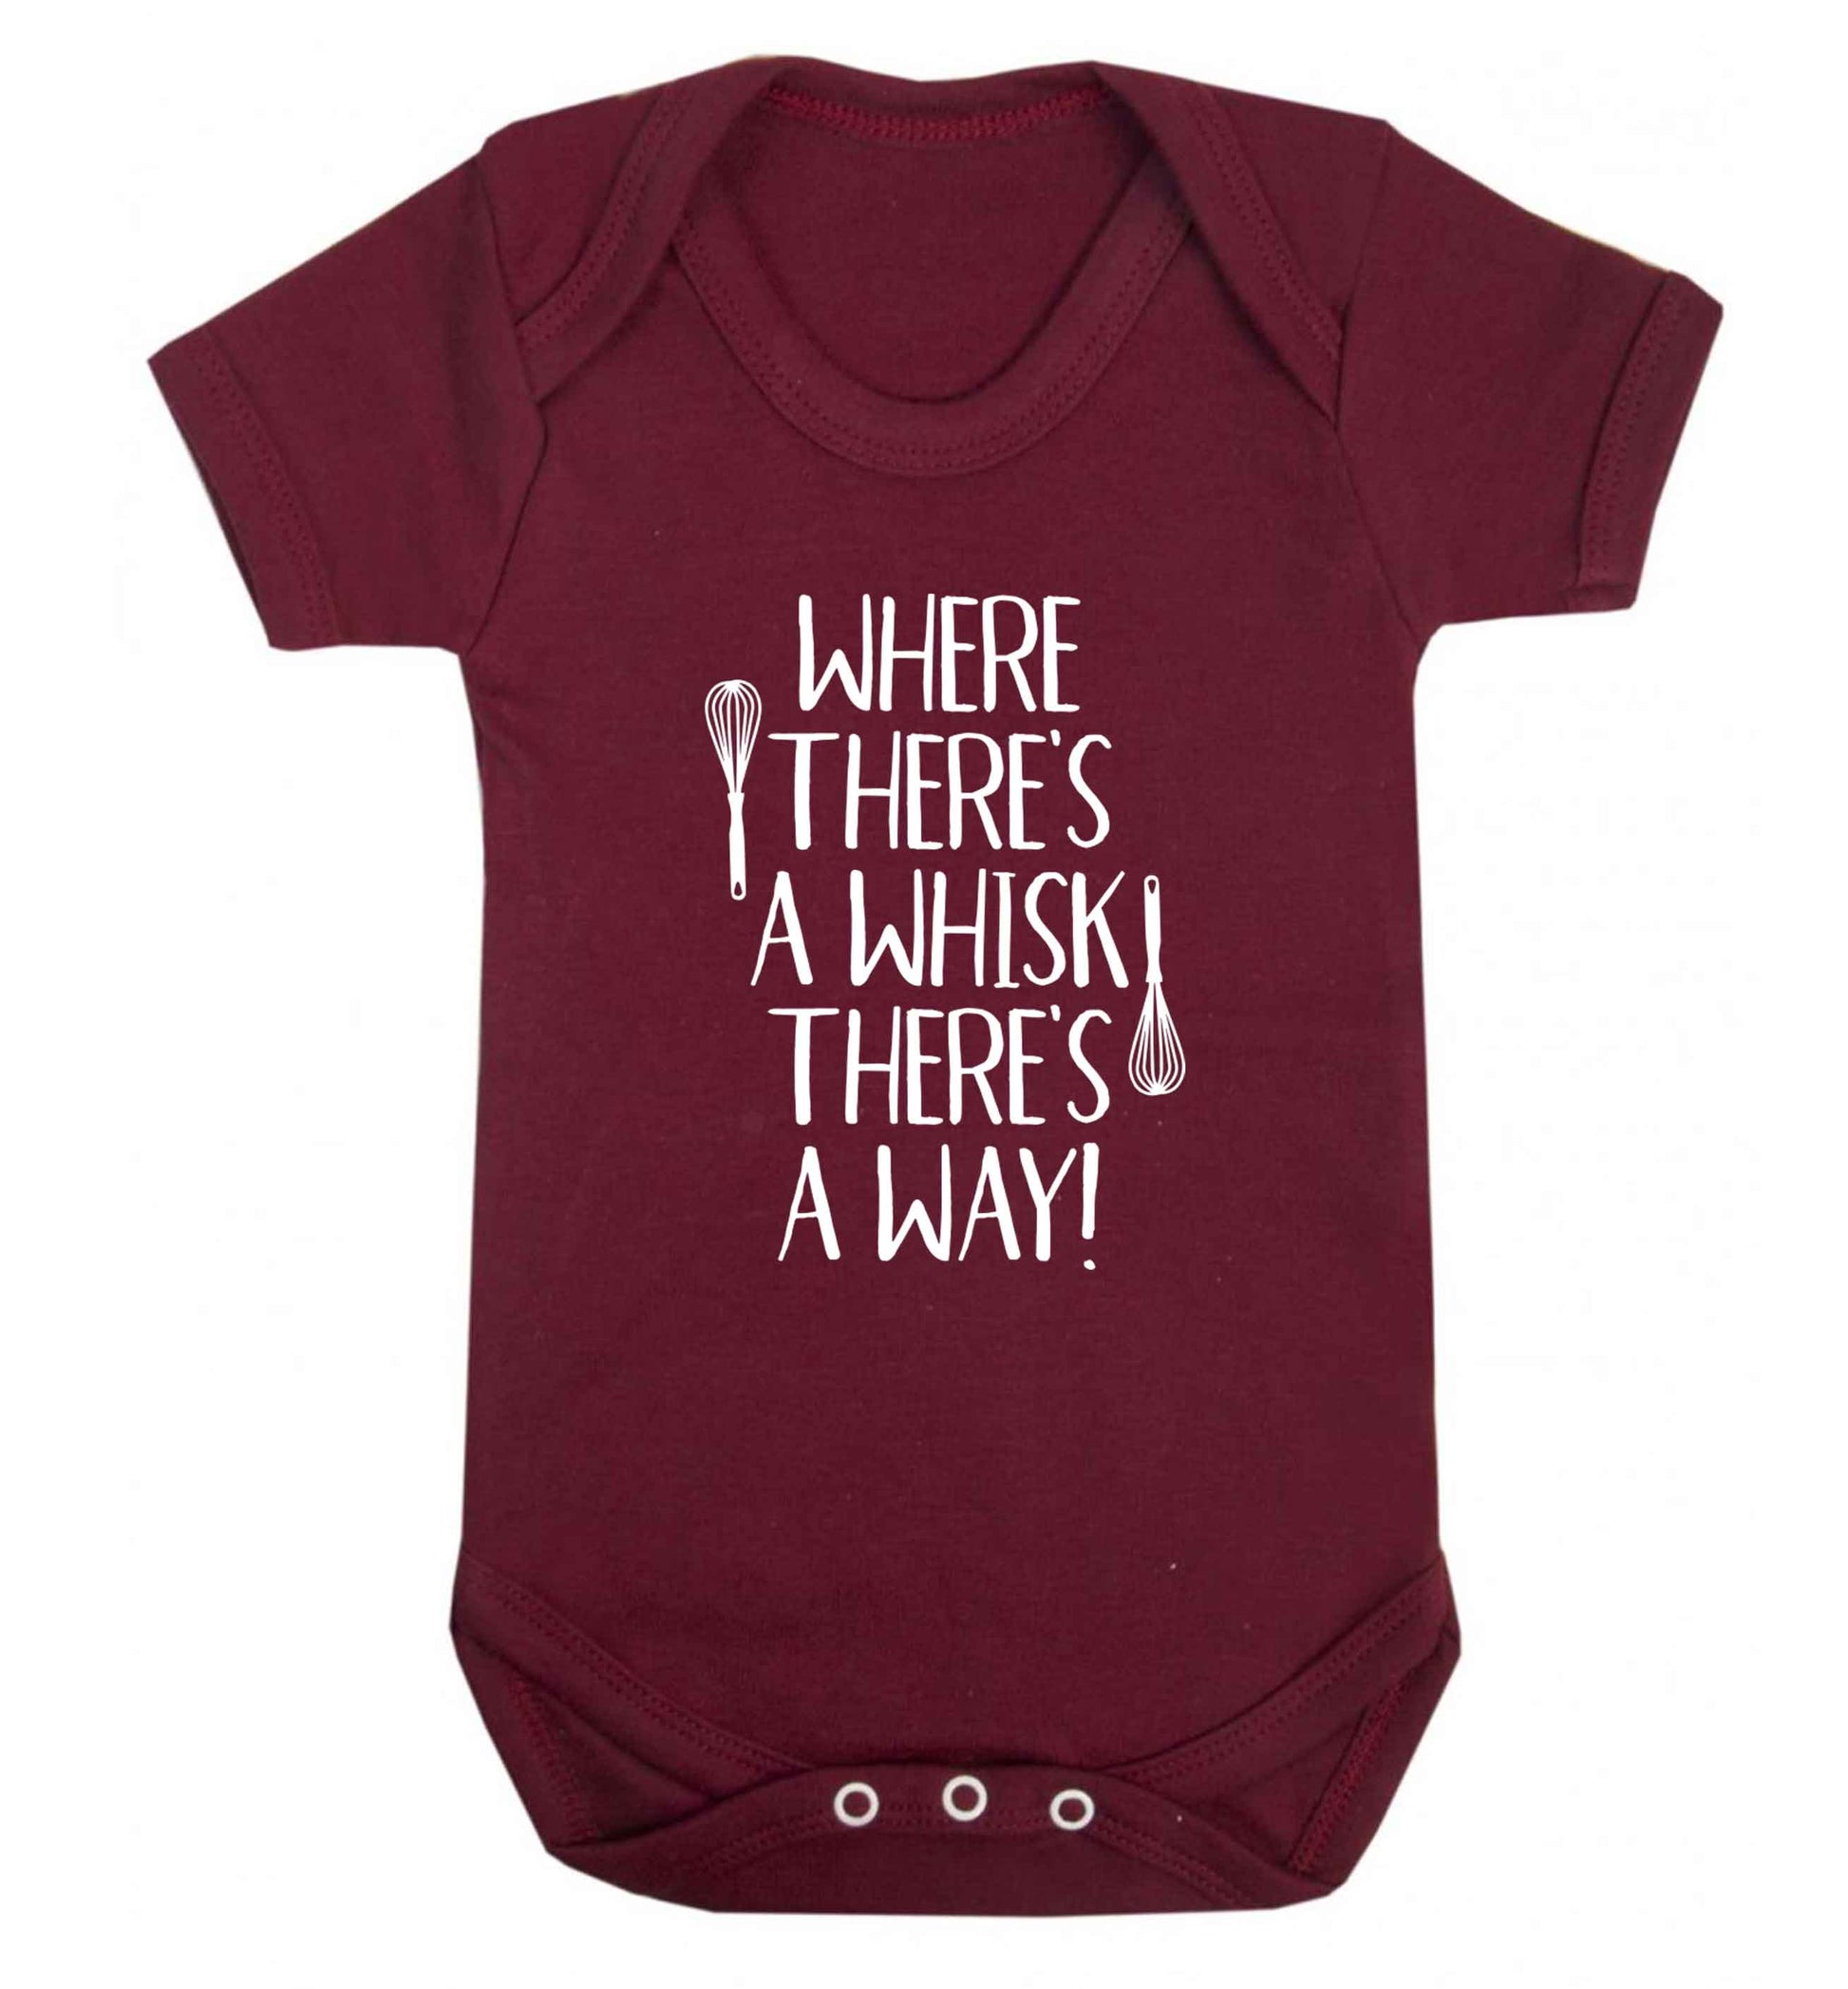 Where there's a whisk there's a way Baby Vest maroon 18-24 months